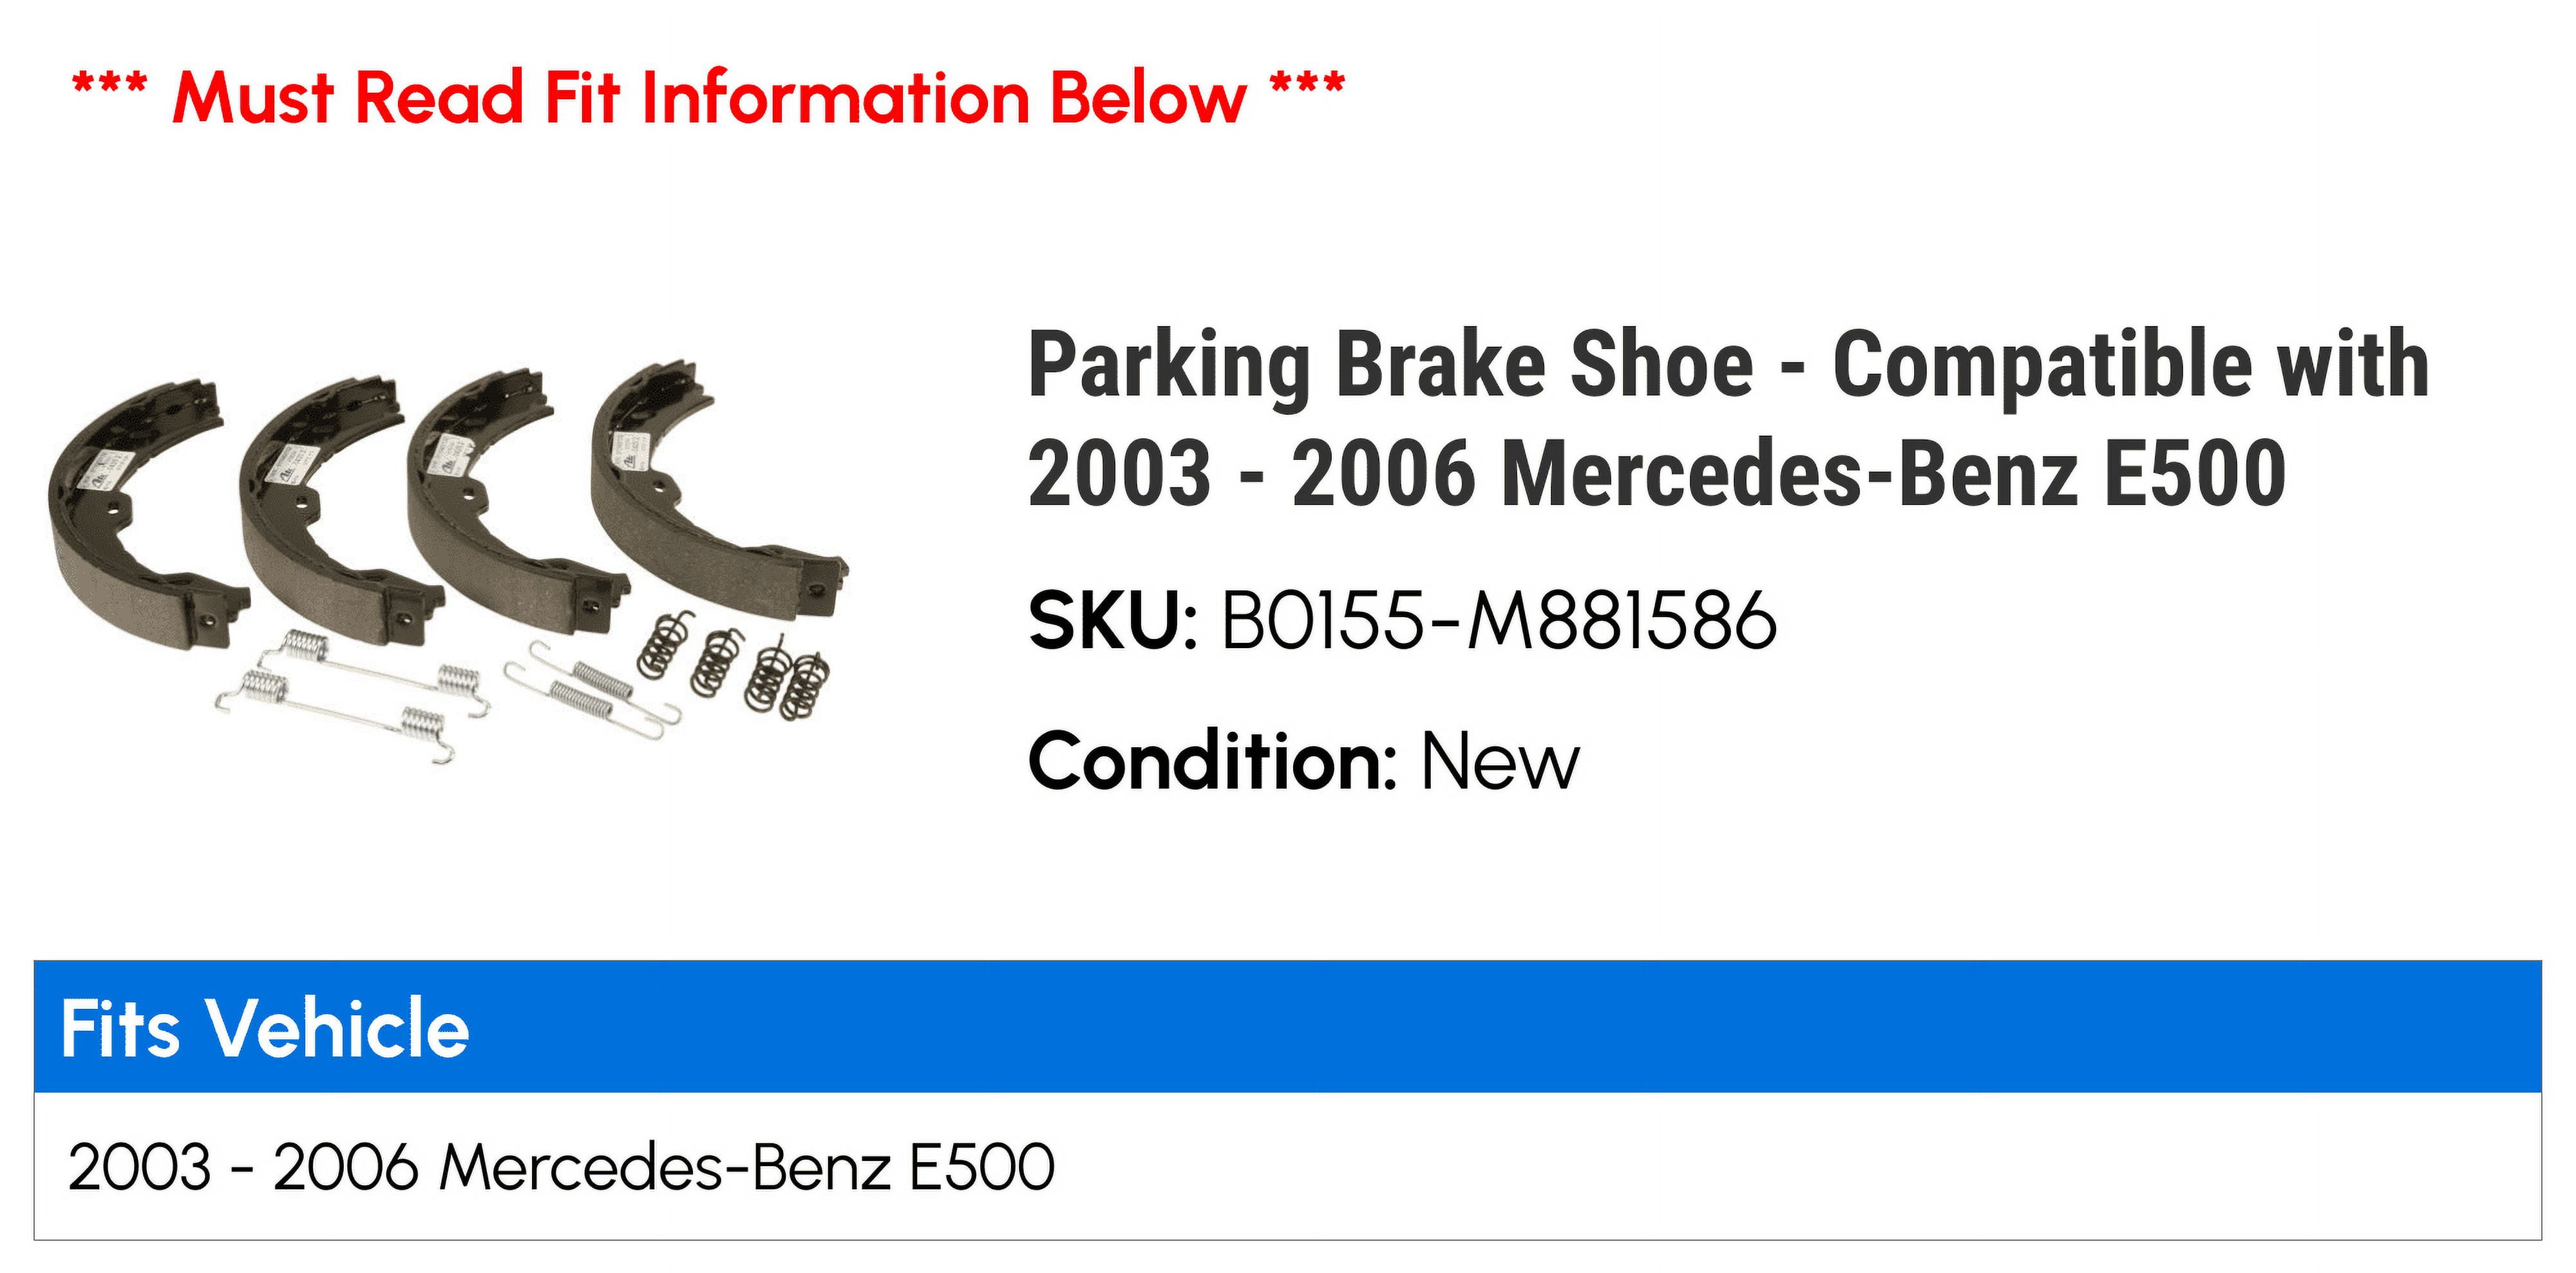 Parking Brake Shoe - Compatible with 2003 - 2006 Mercedes-Benz